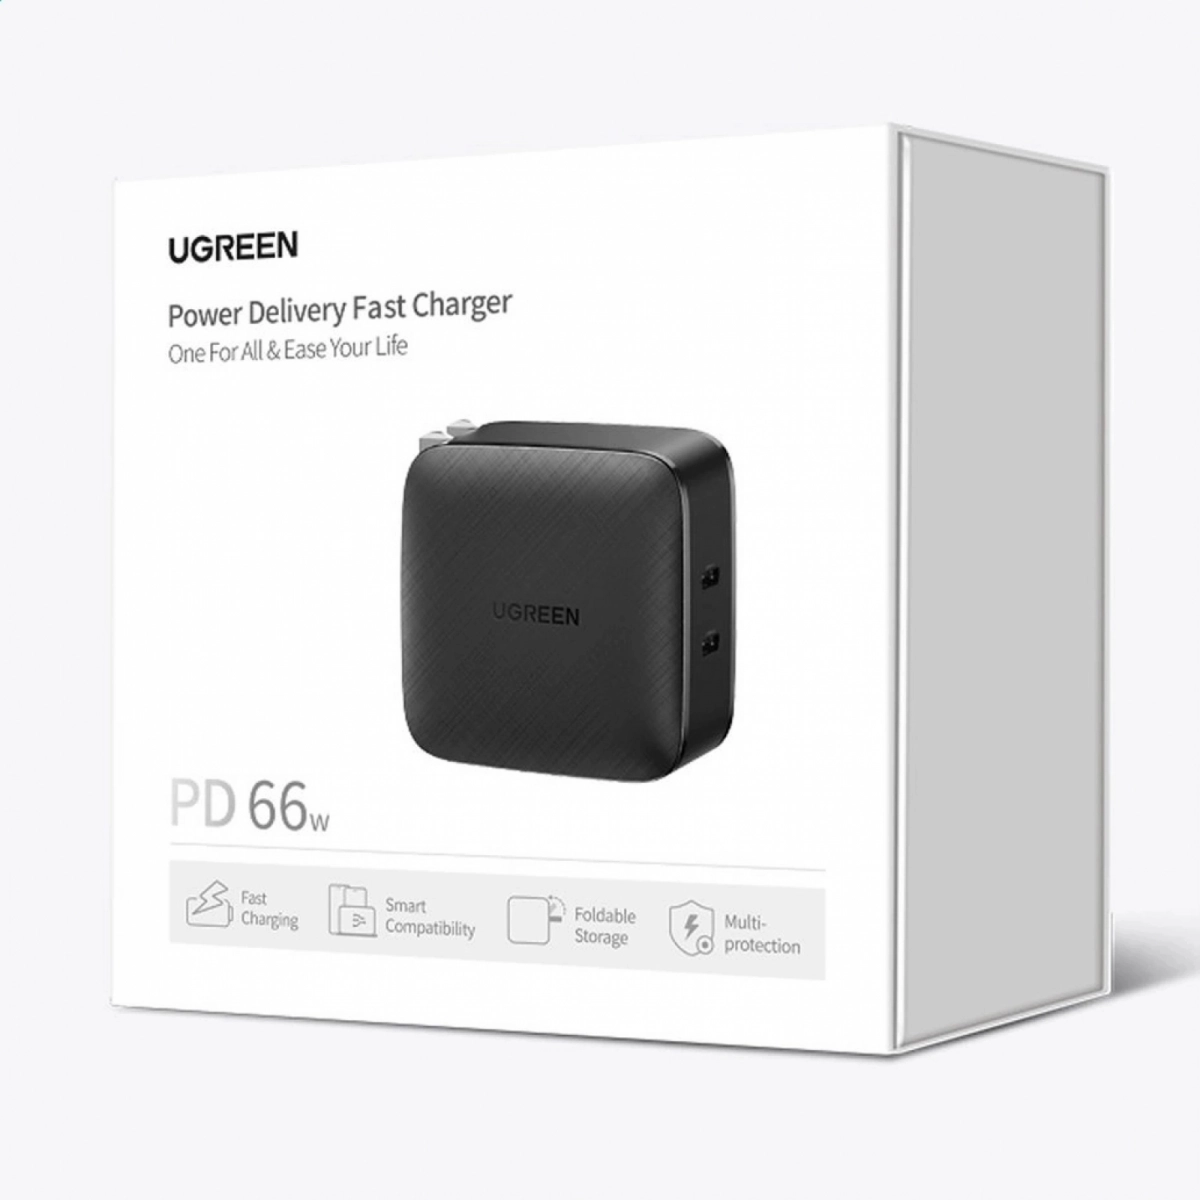 UGREEN Wandladegerät 2x USB Typ C 66W Power Delivery 3.0 Quick Charge 4.0+ PD, QC, FCP, SCP CD216 schwarz